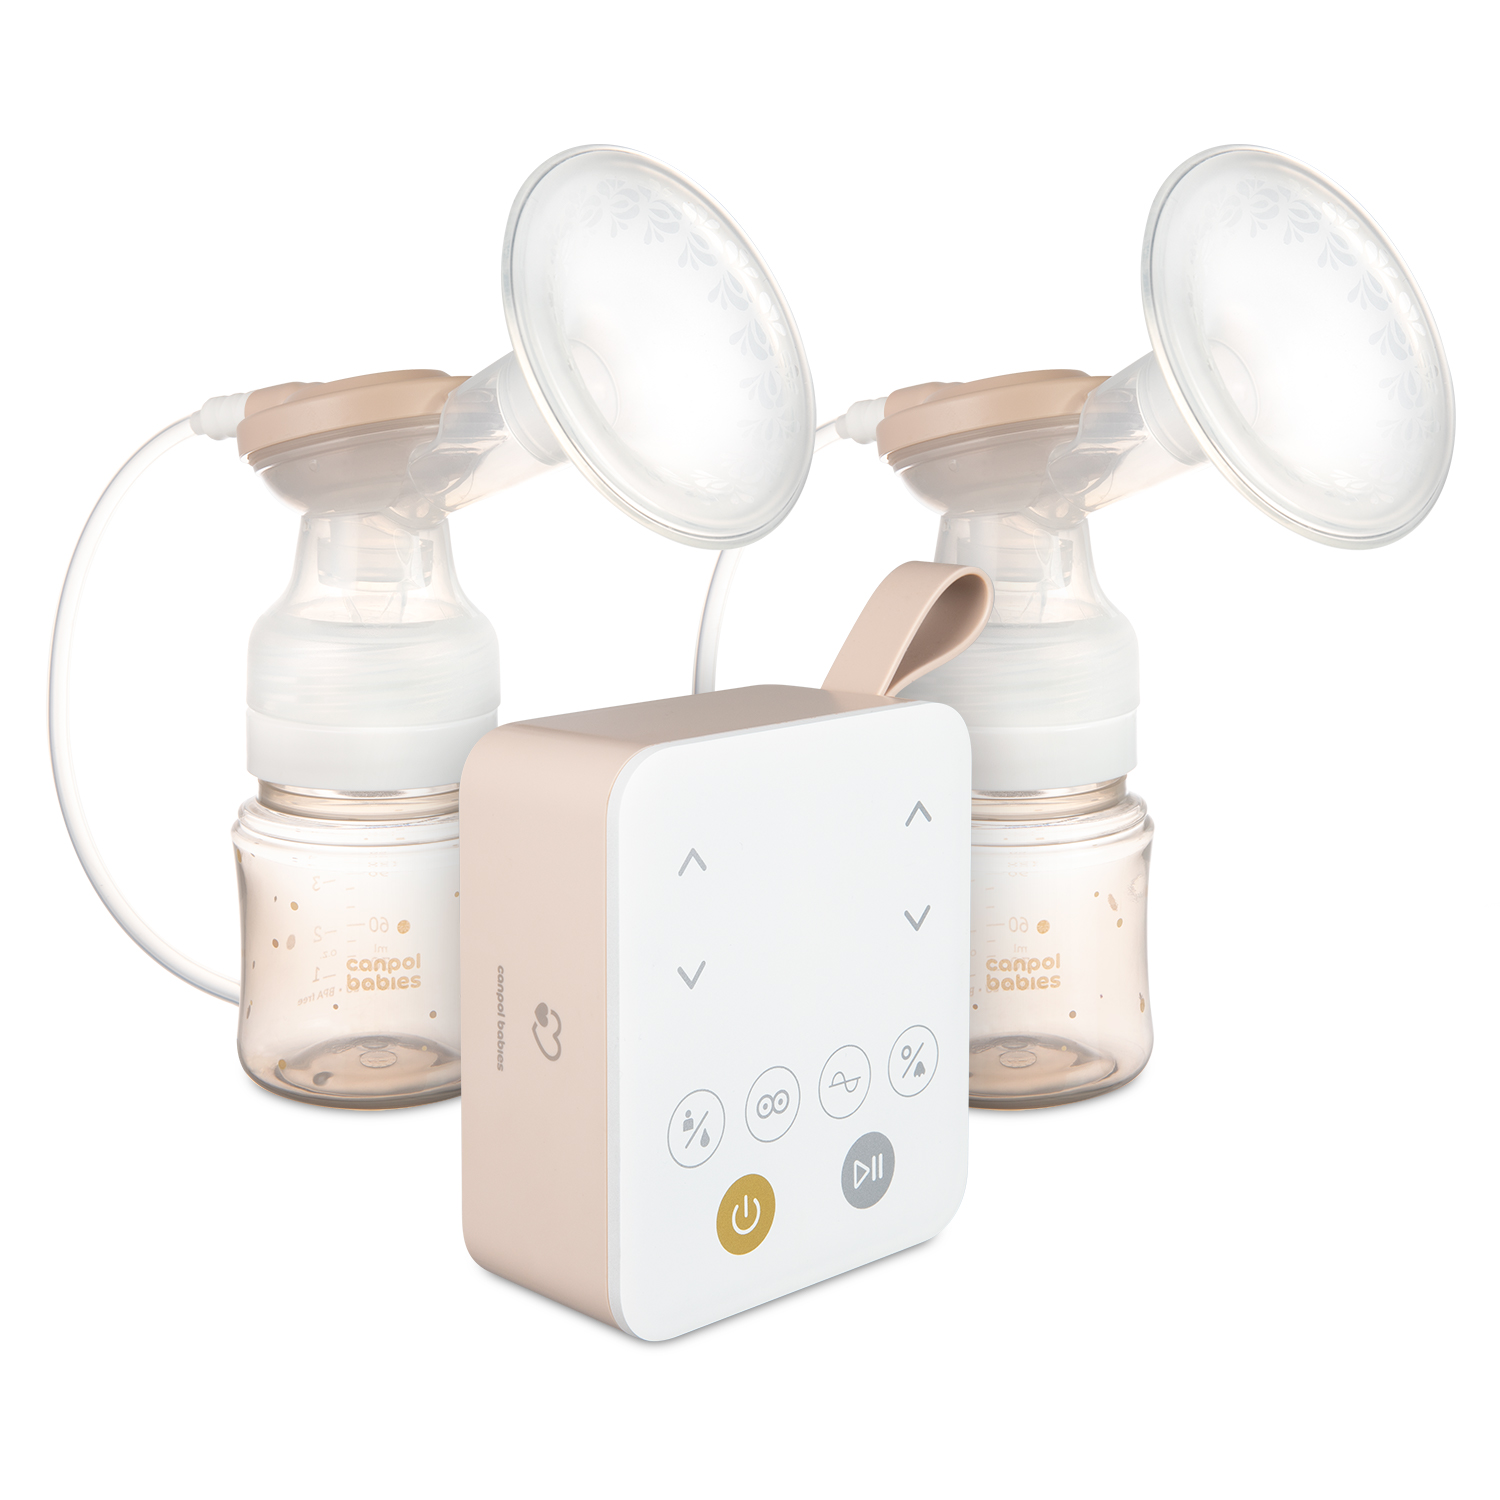 Canpol babies Double Electric Breast Pump ExpressCare with Nasal